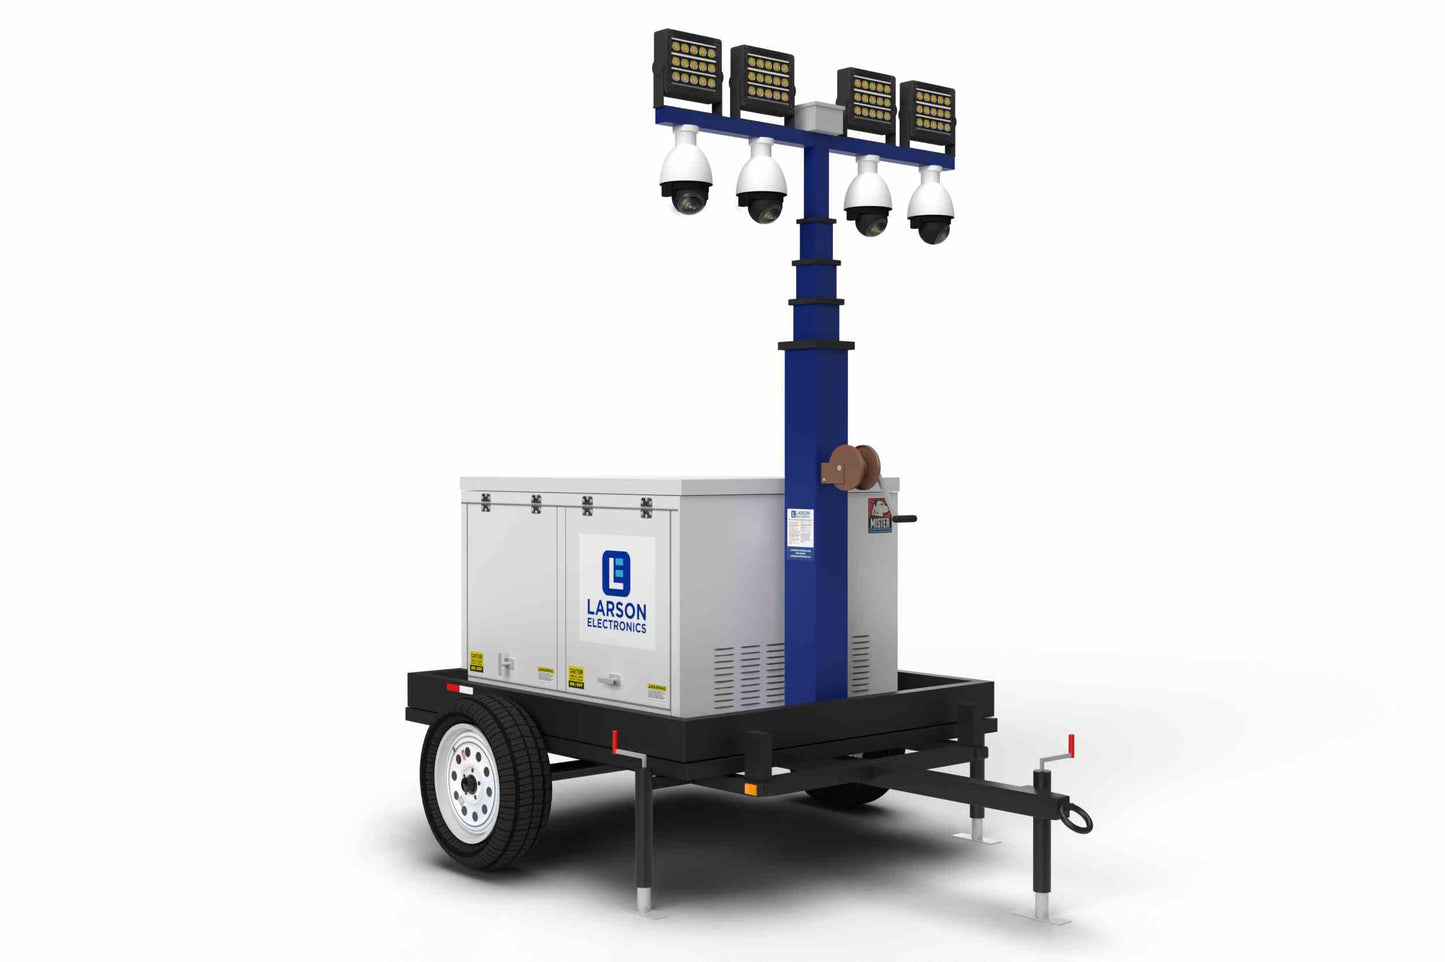 Larson Electronics 40' Telescoping Mobile Security Tower - 6 kW Diesel Gen - (4) LED Lamps, Router/WAP - Receptacles